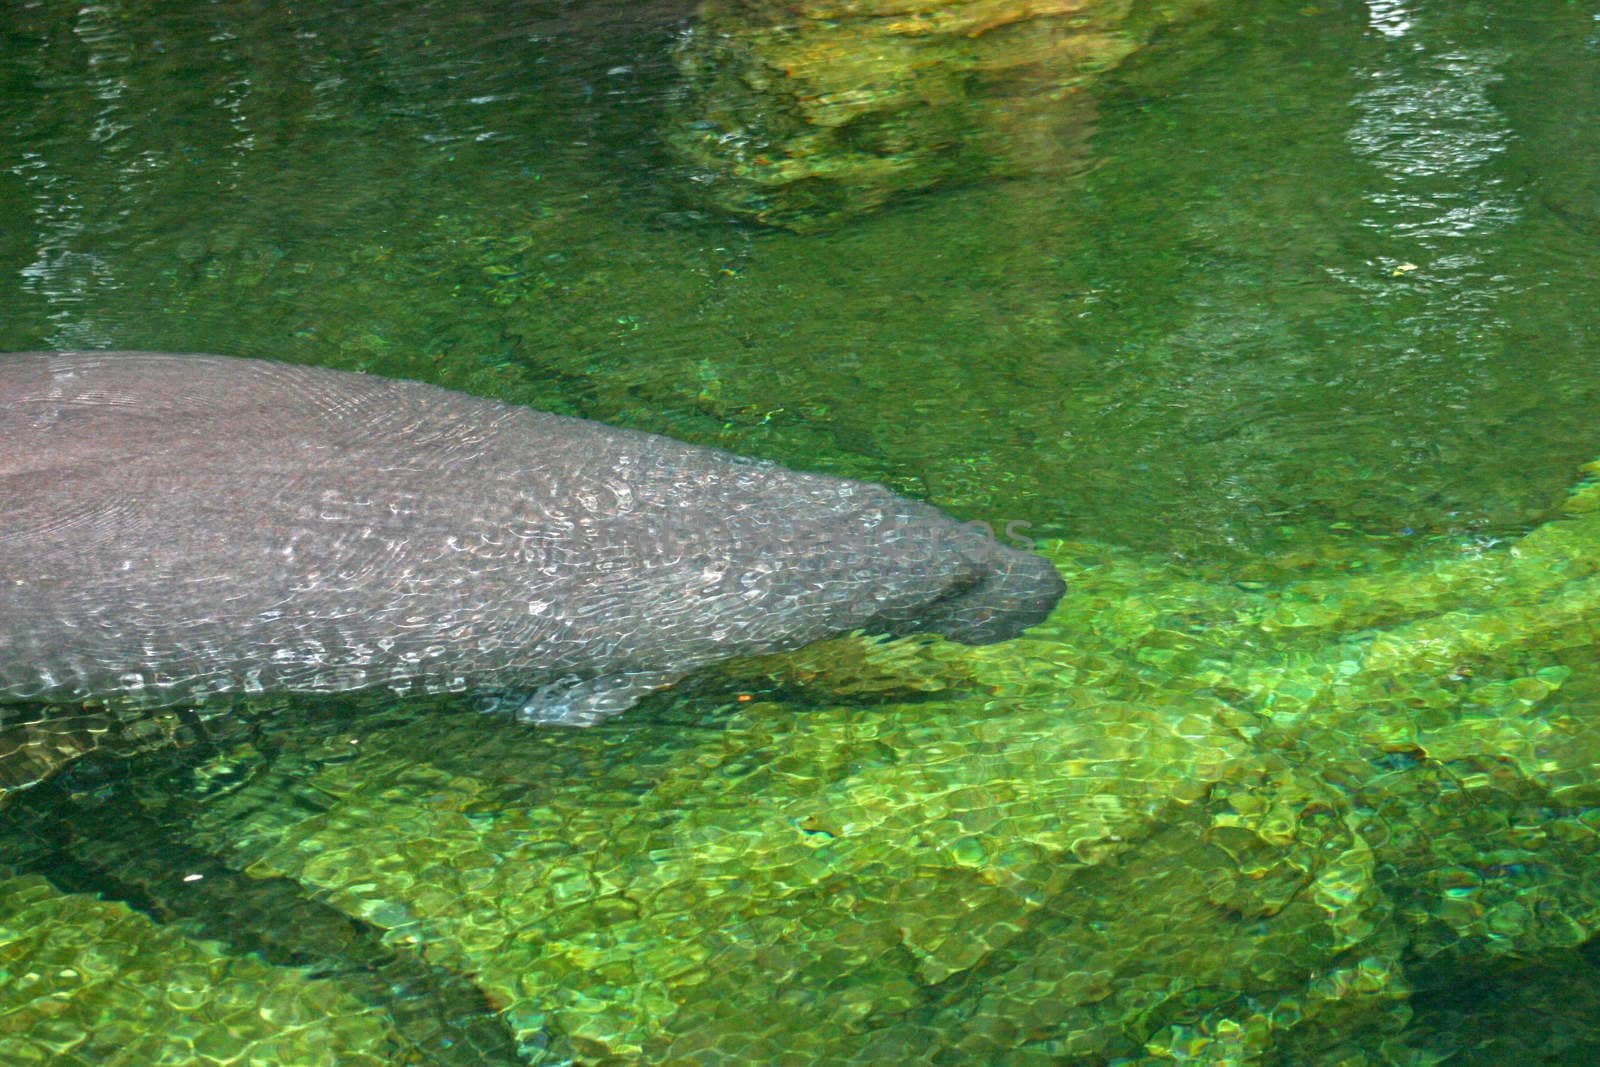 A manatee is swimming through the water